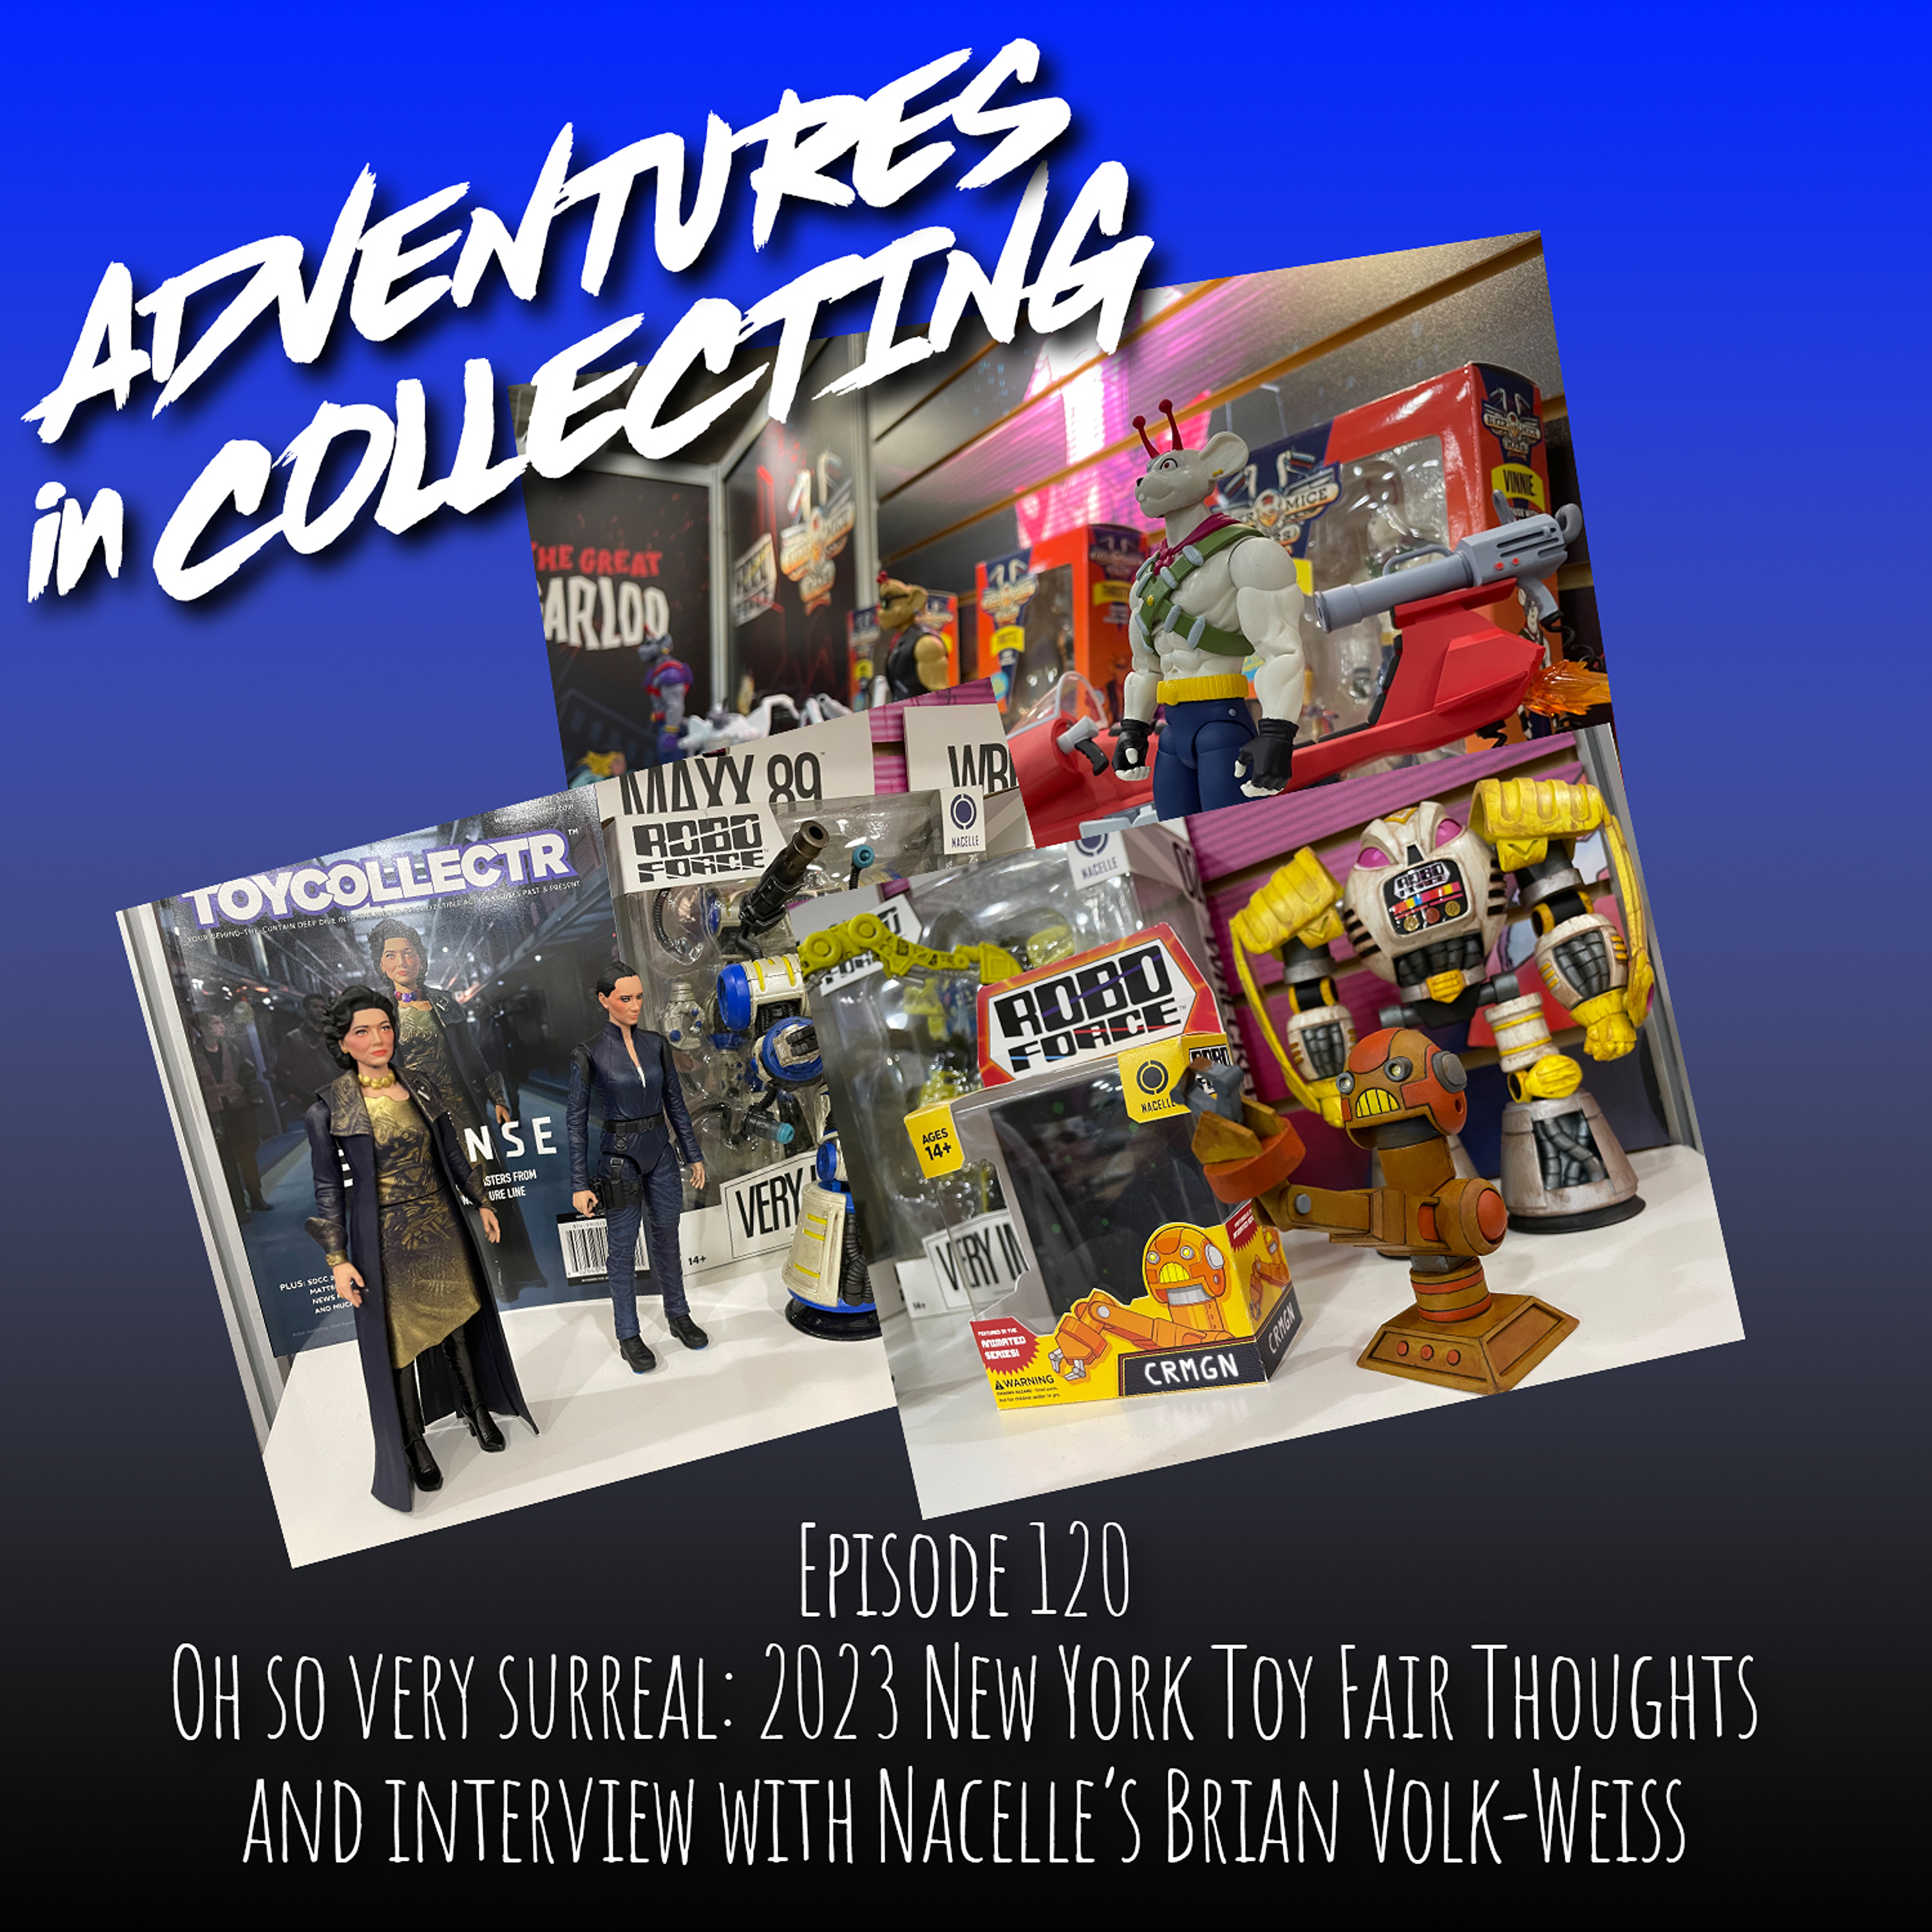 Oh So Very Surreal: 2023 New York Toy Fair Thoughts and Interview with Nacelle’s Brian Volk-Weiss